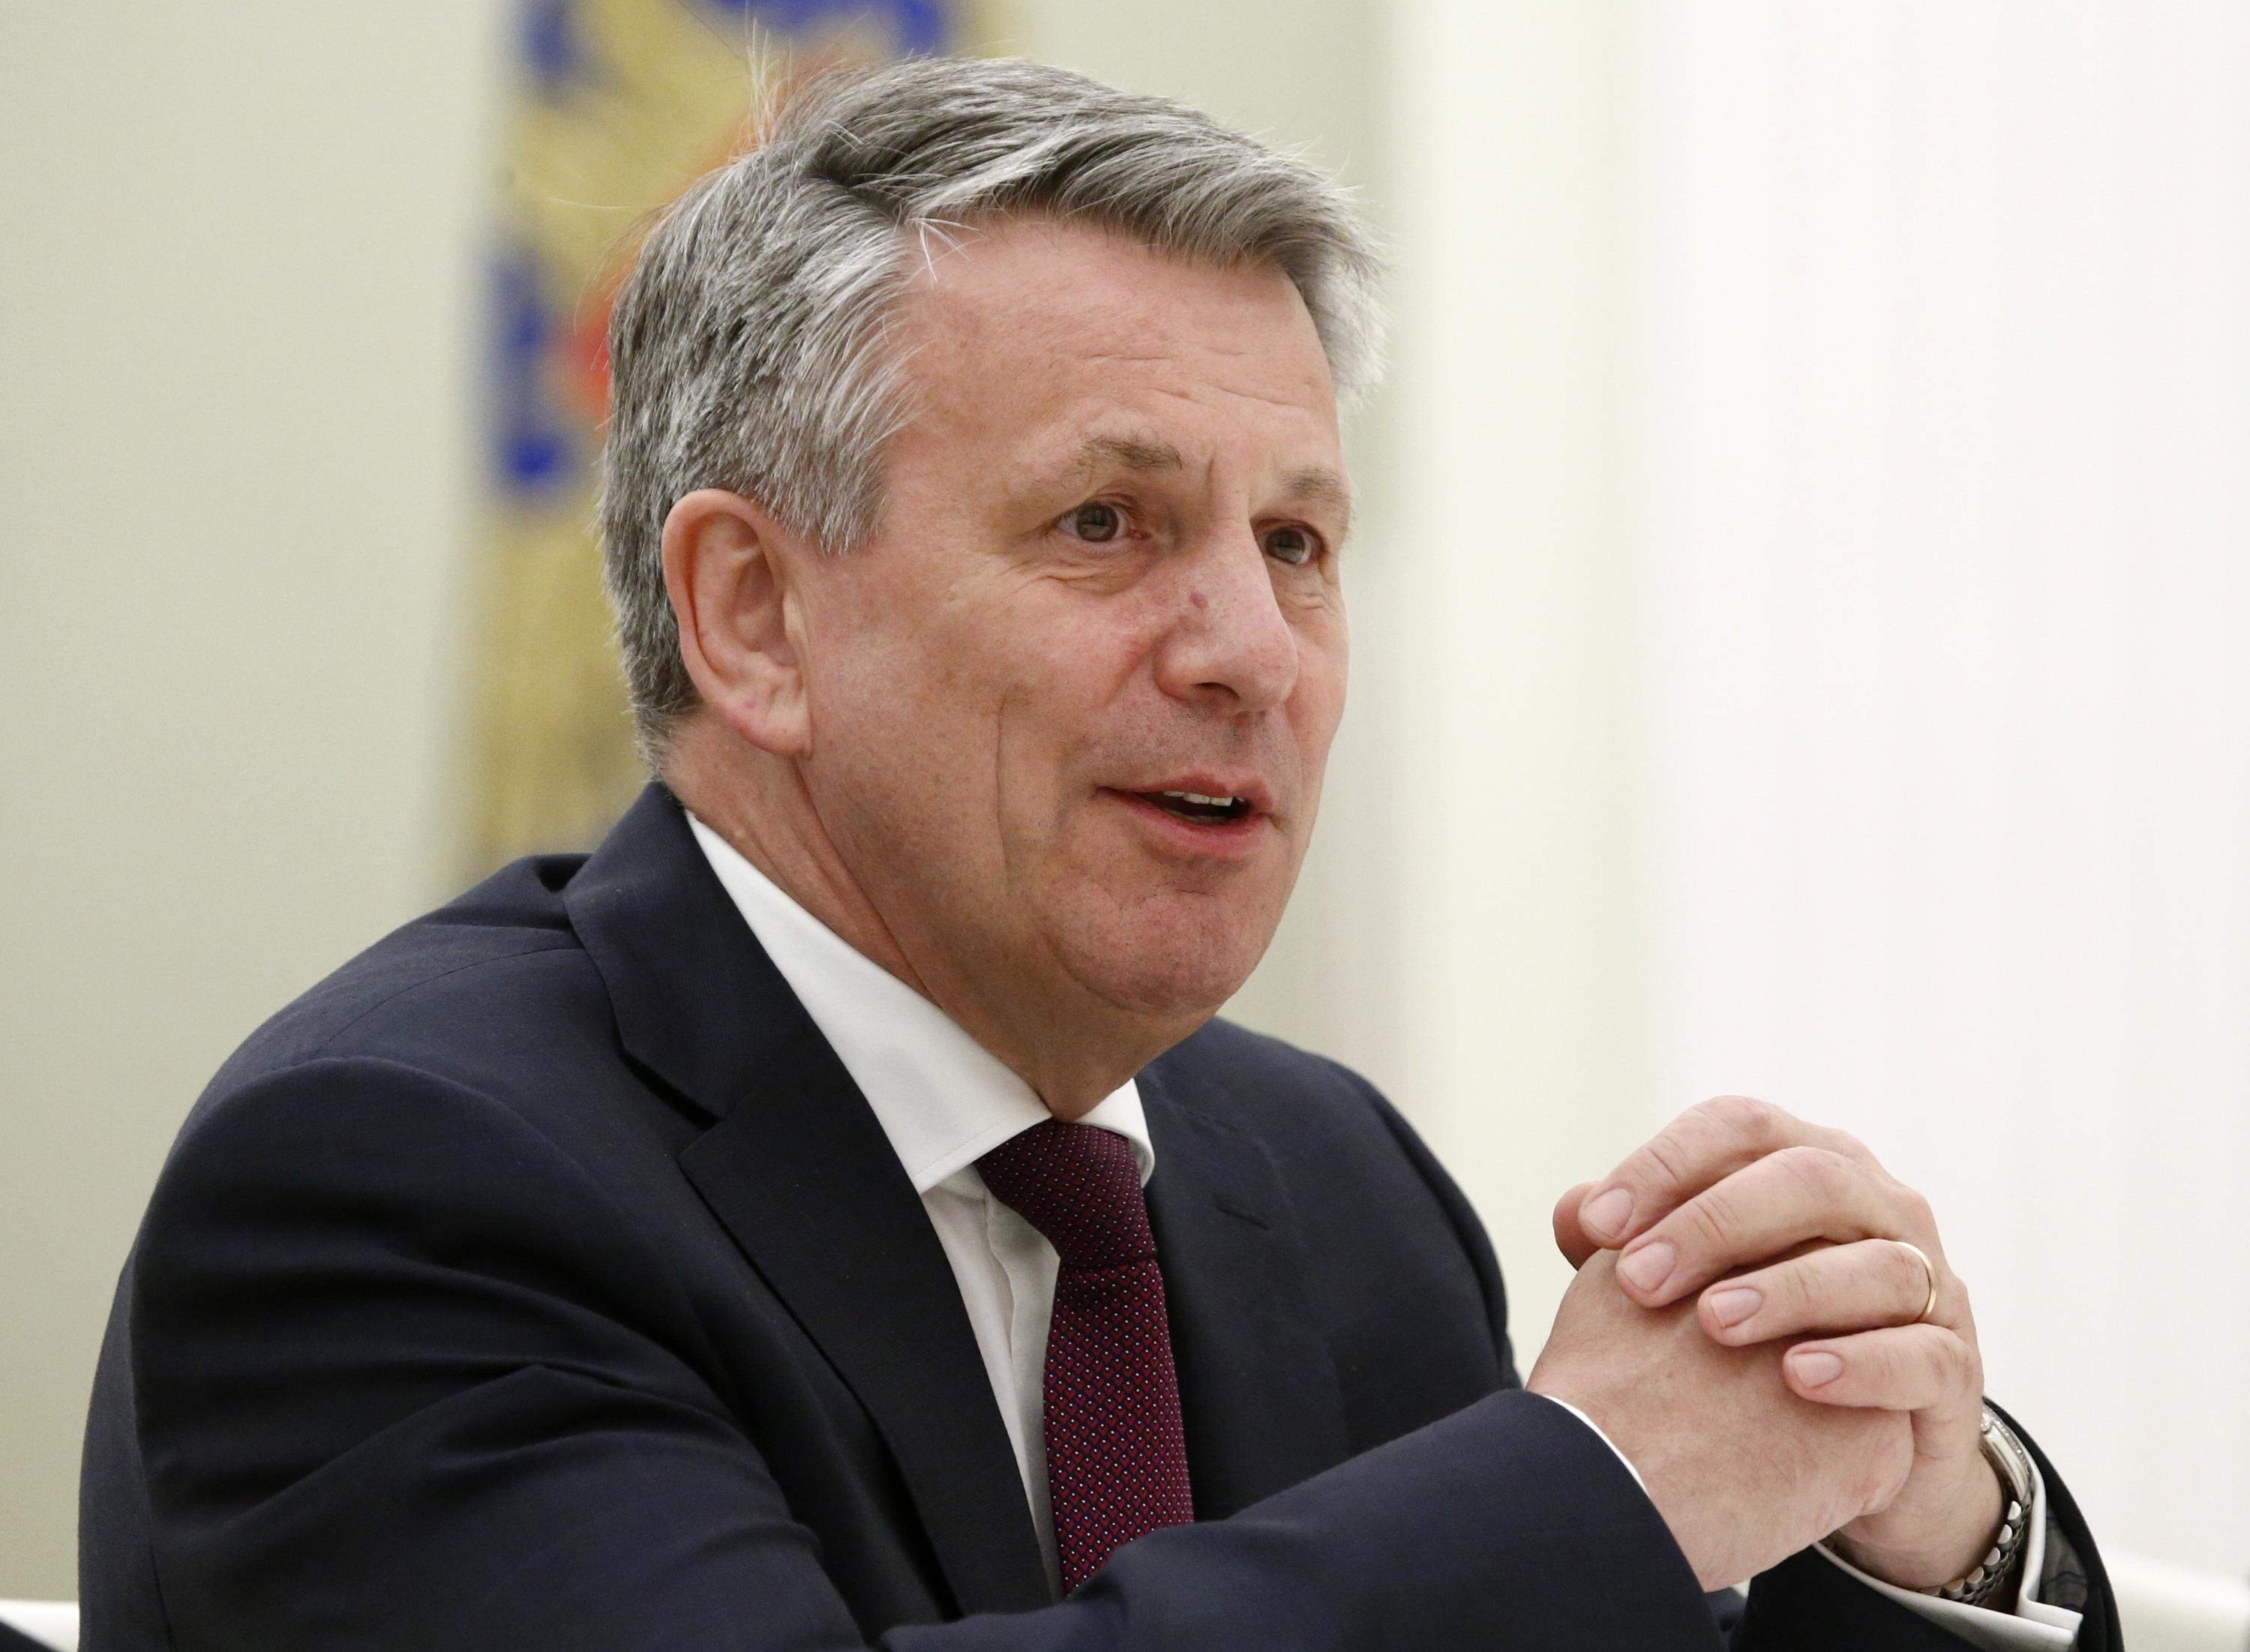 Shell CEO to step down as oil giant looks to climate goals